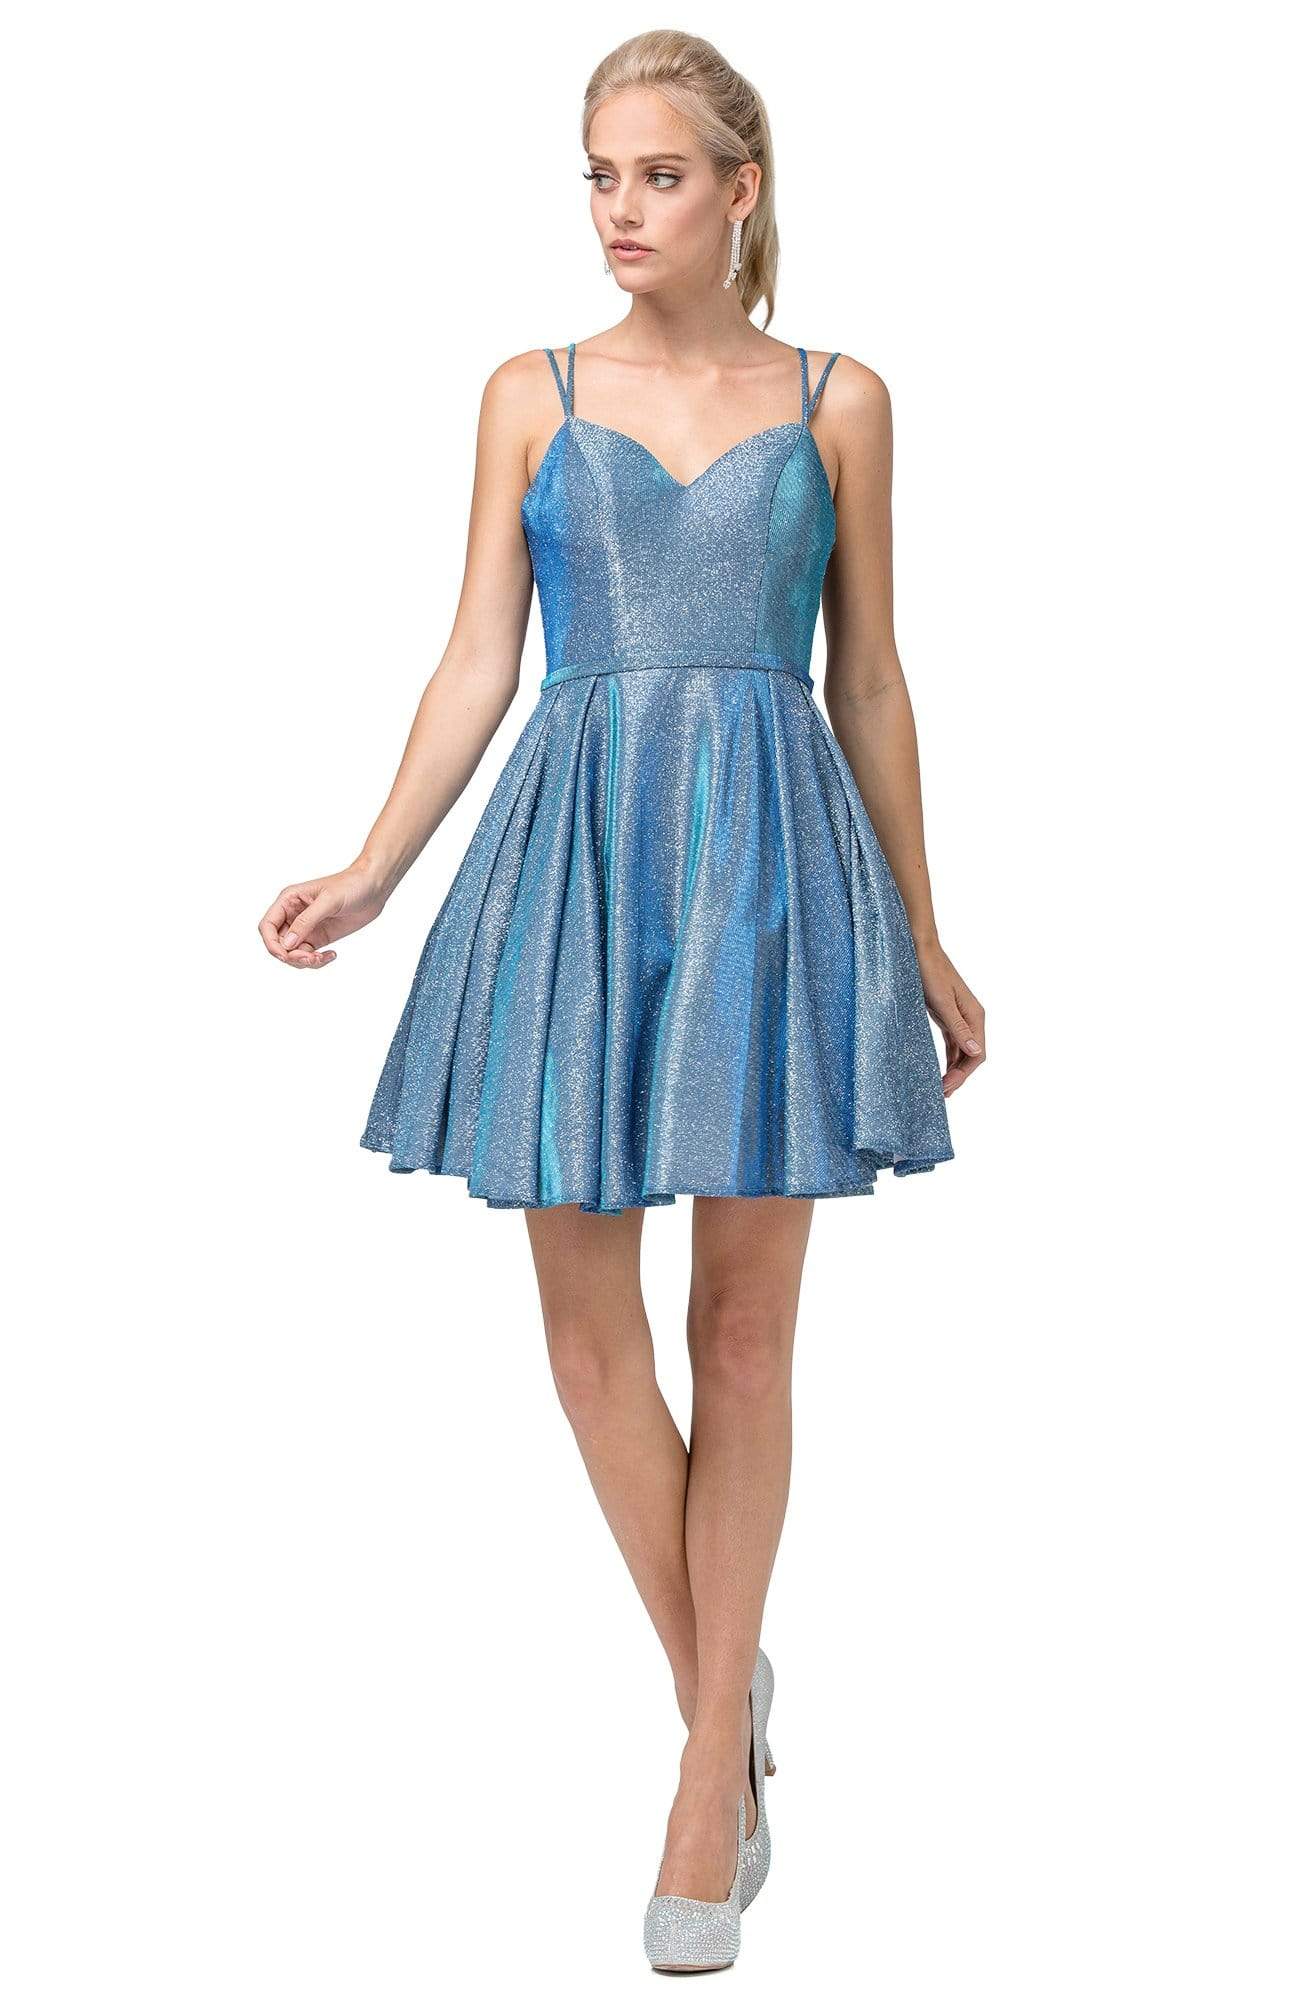 Dancing Queen - 3144 Double Strap Sweetheart Neck A-Line Glitter Dress Homecoming Dresses XS / Blue